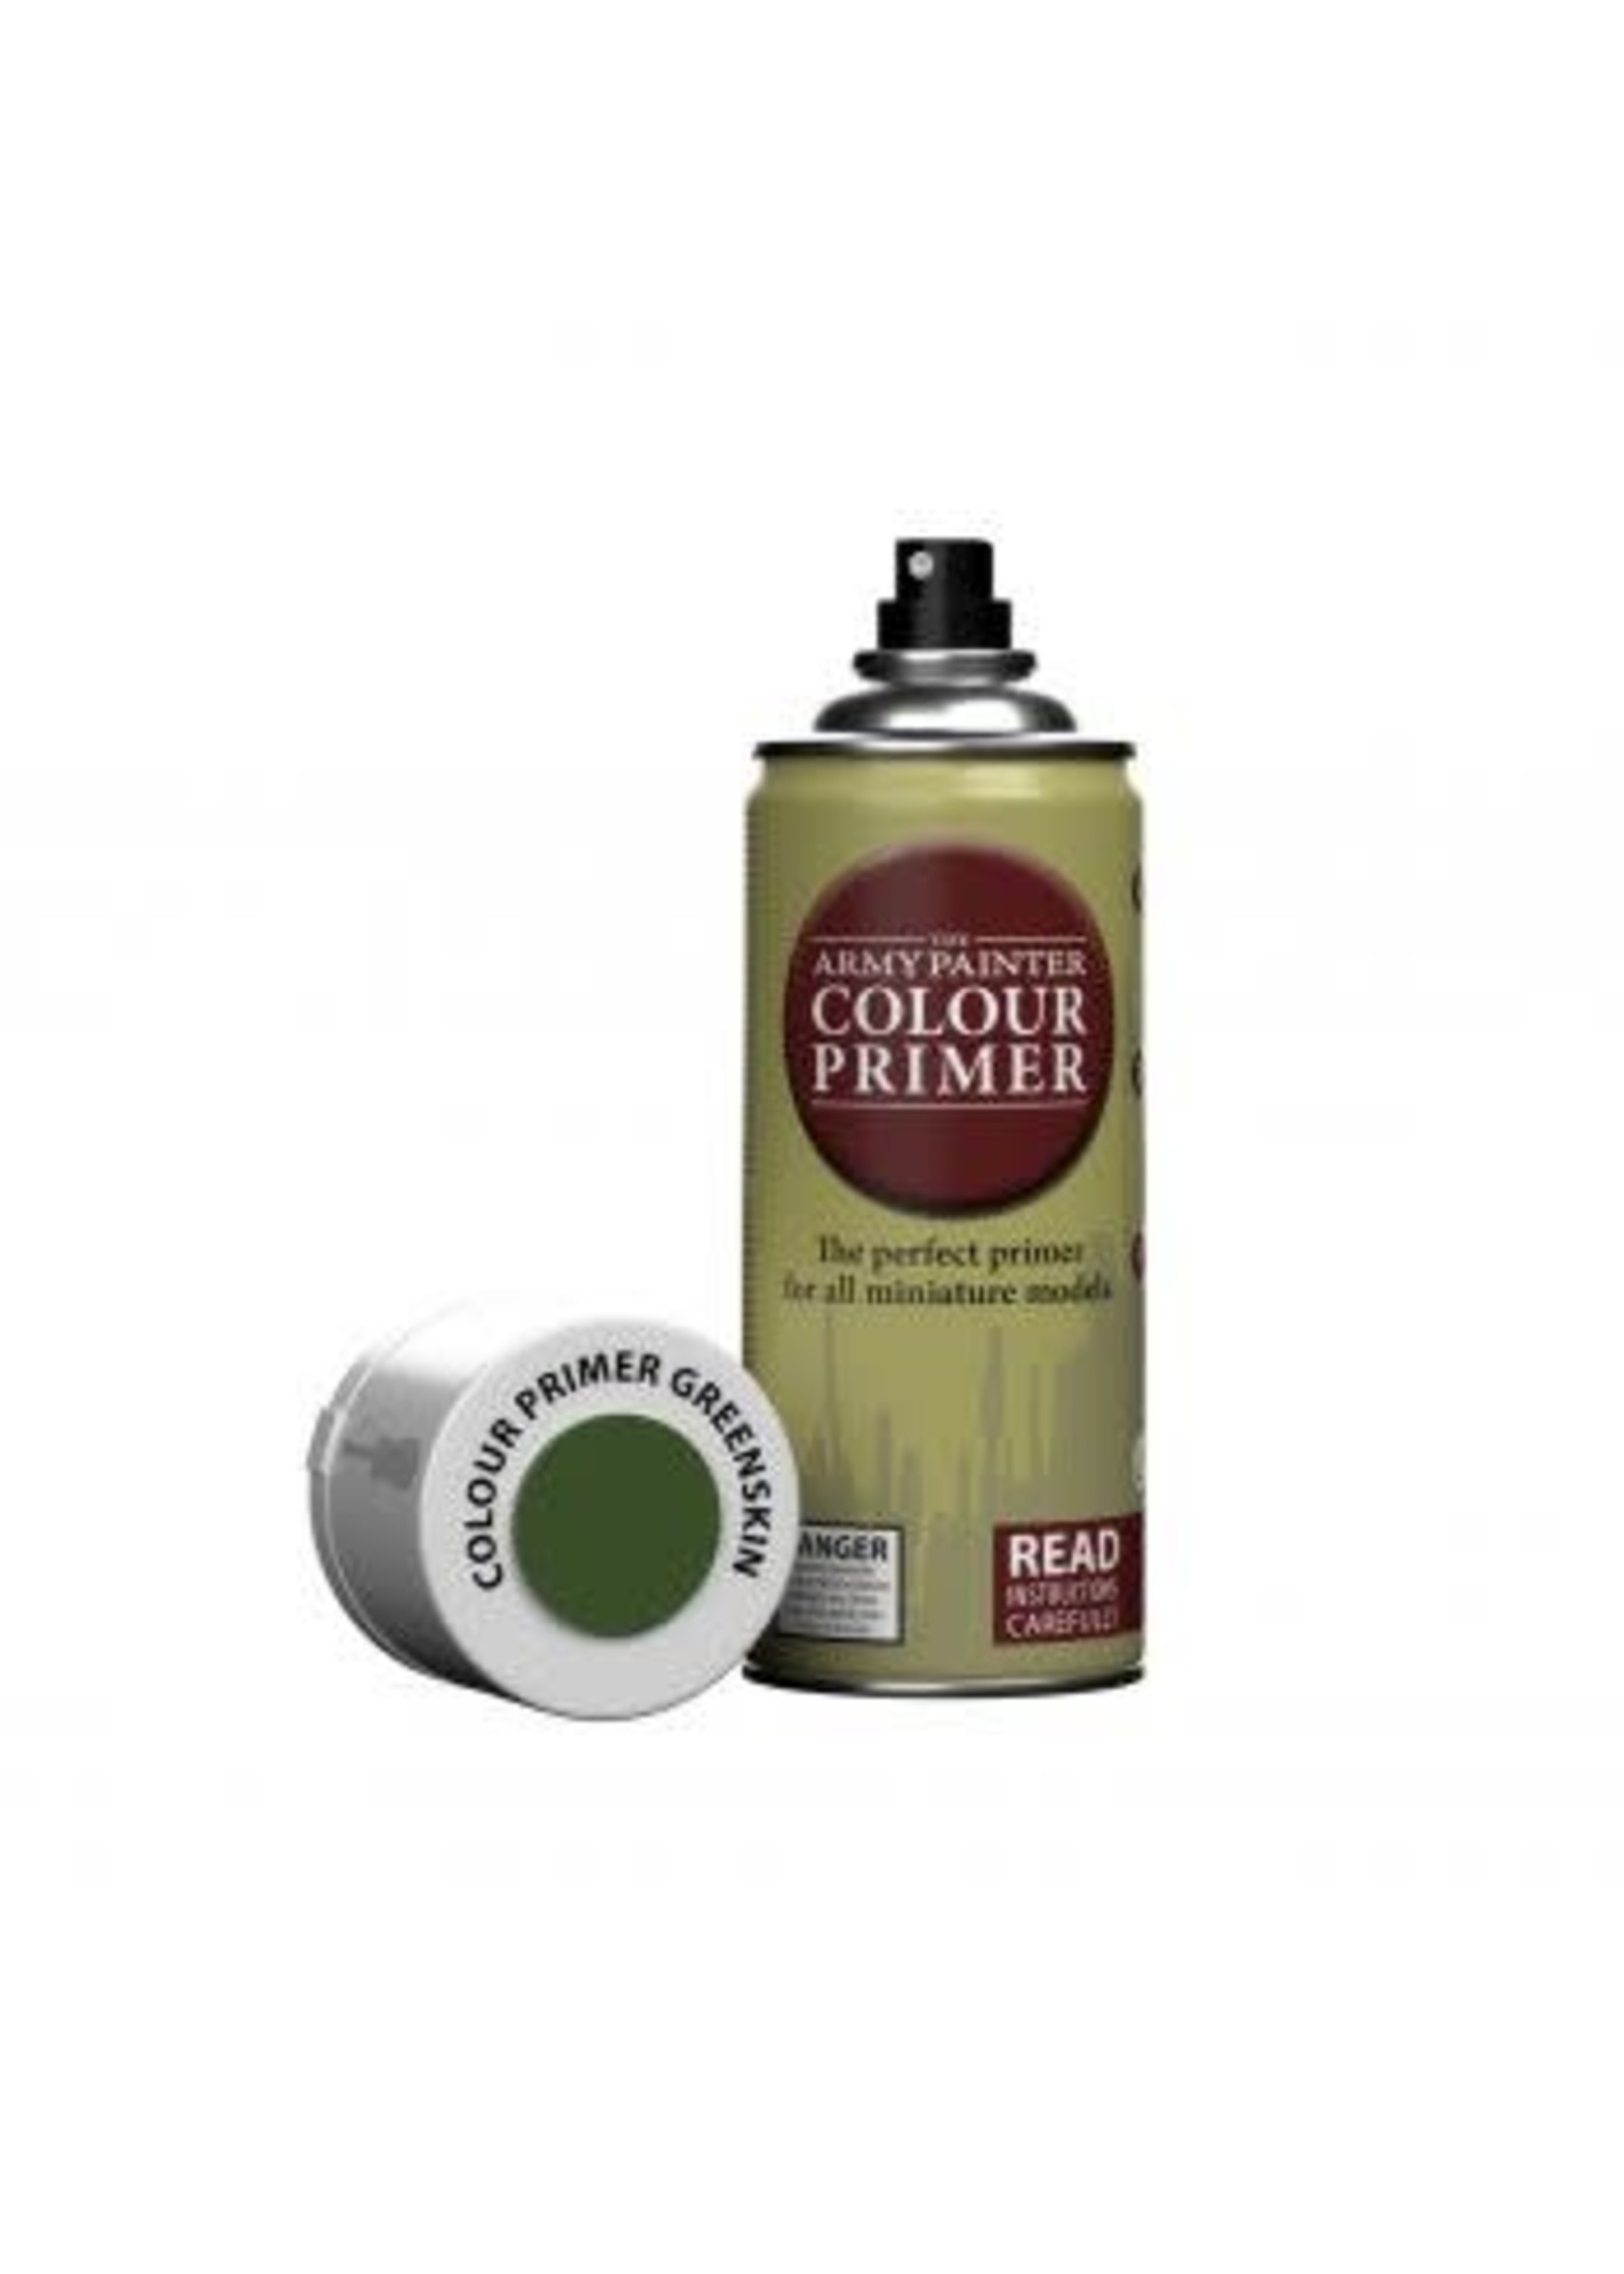 The Army Painter Greenskin - The Army Painter Spray